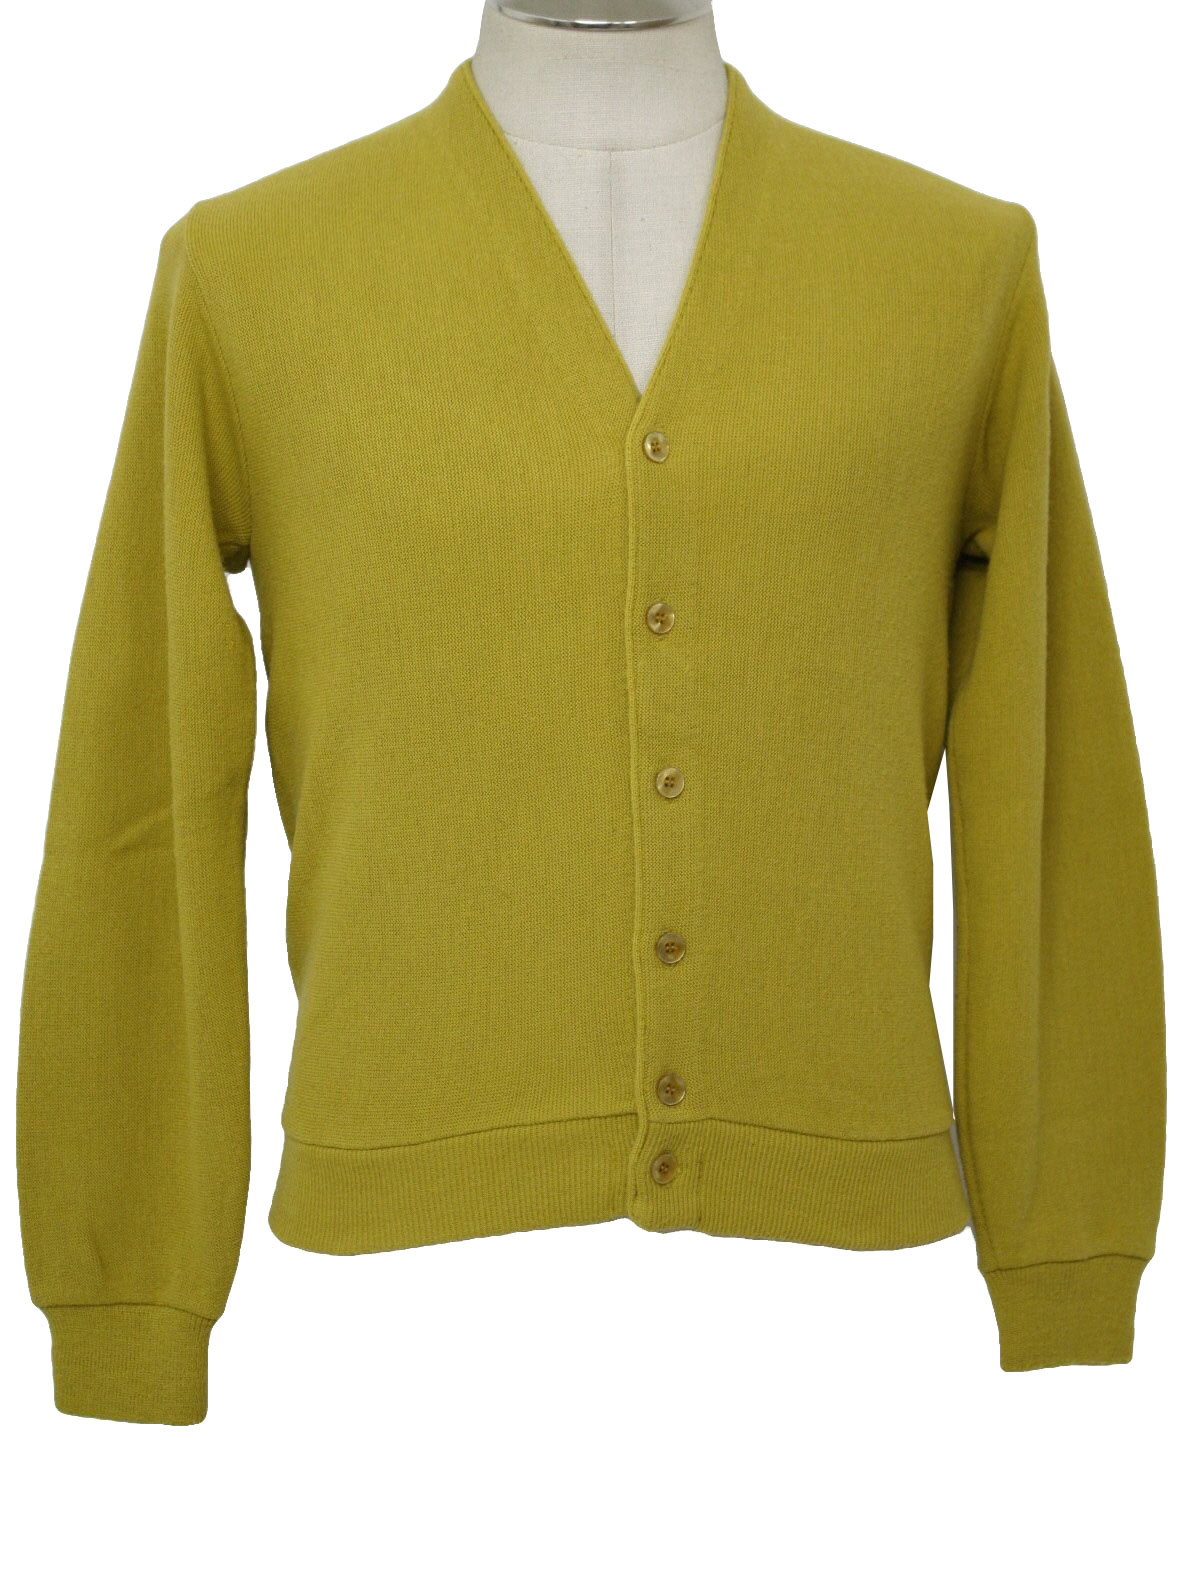 60s Vintage Sears Caridgan Sweater: Late 60s or early 70s -Sears- Mens ...